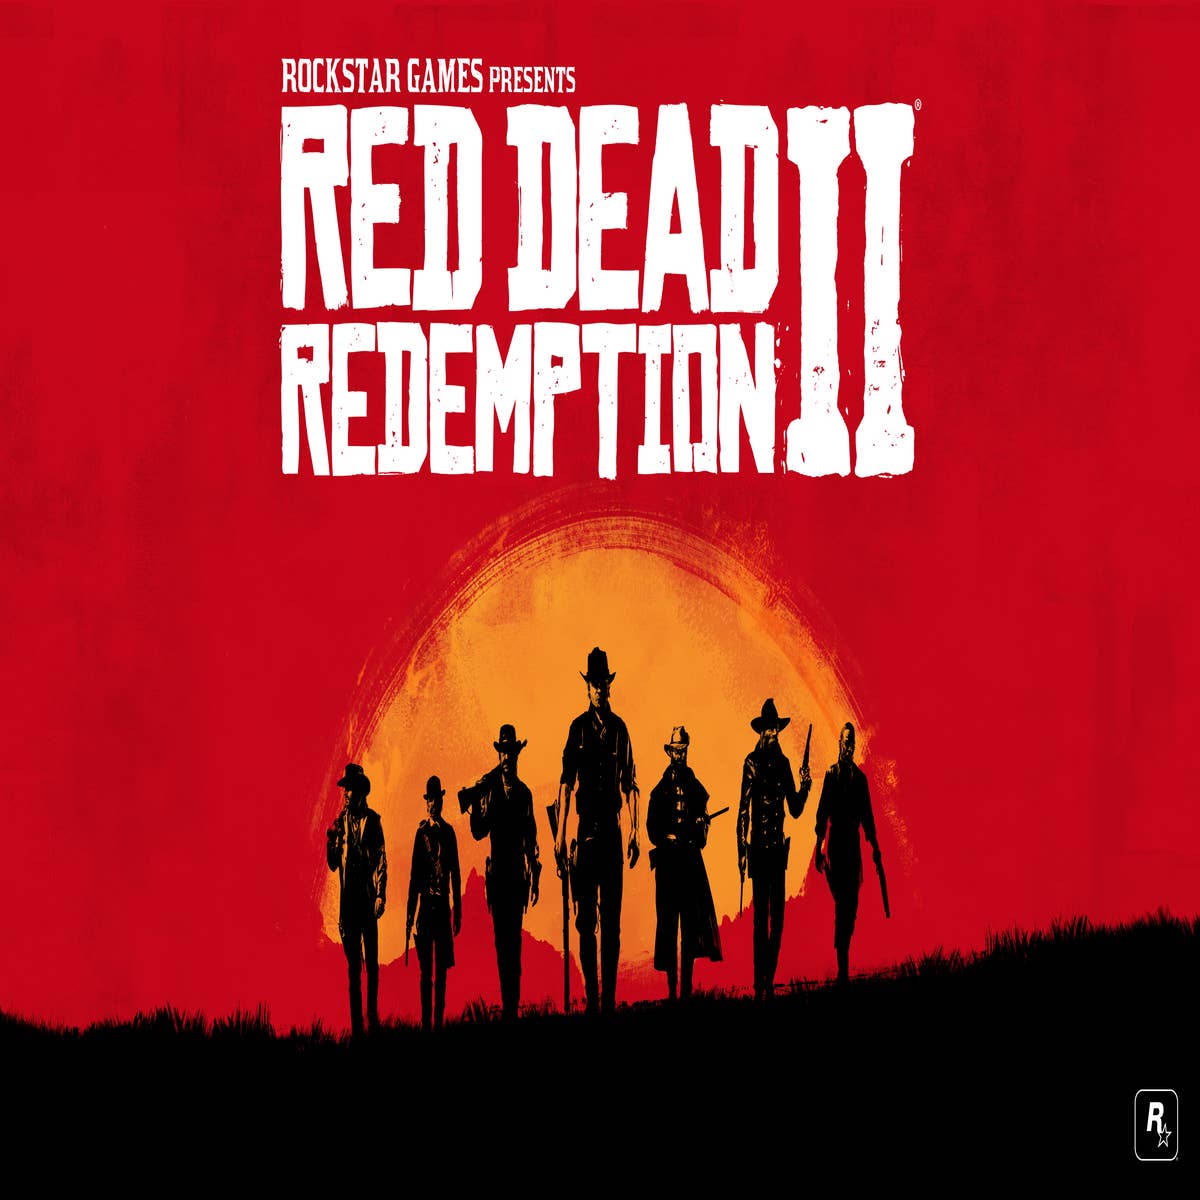 Digital Foundry on X: Red Dead Redemption tested on PlayStation 4